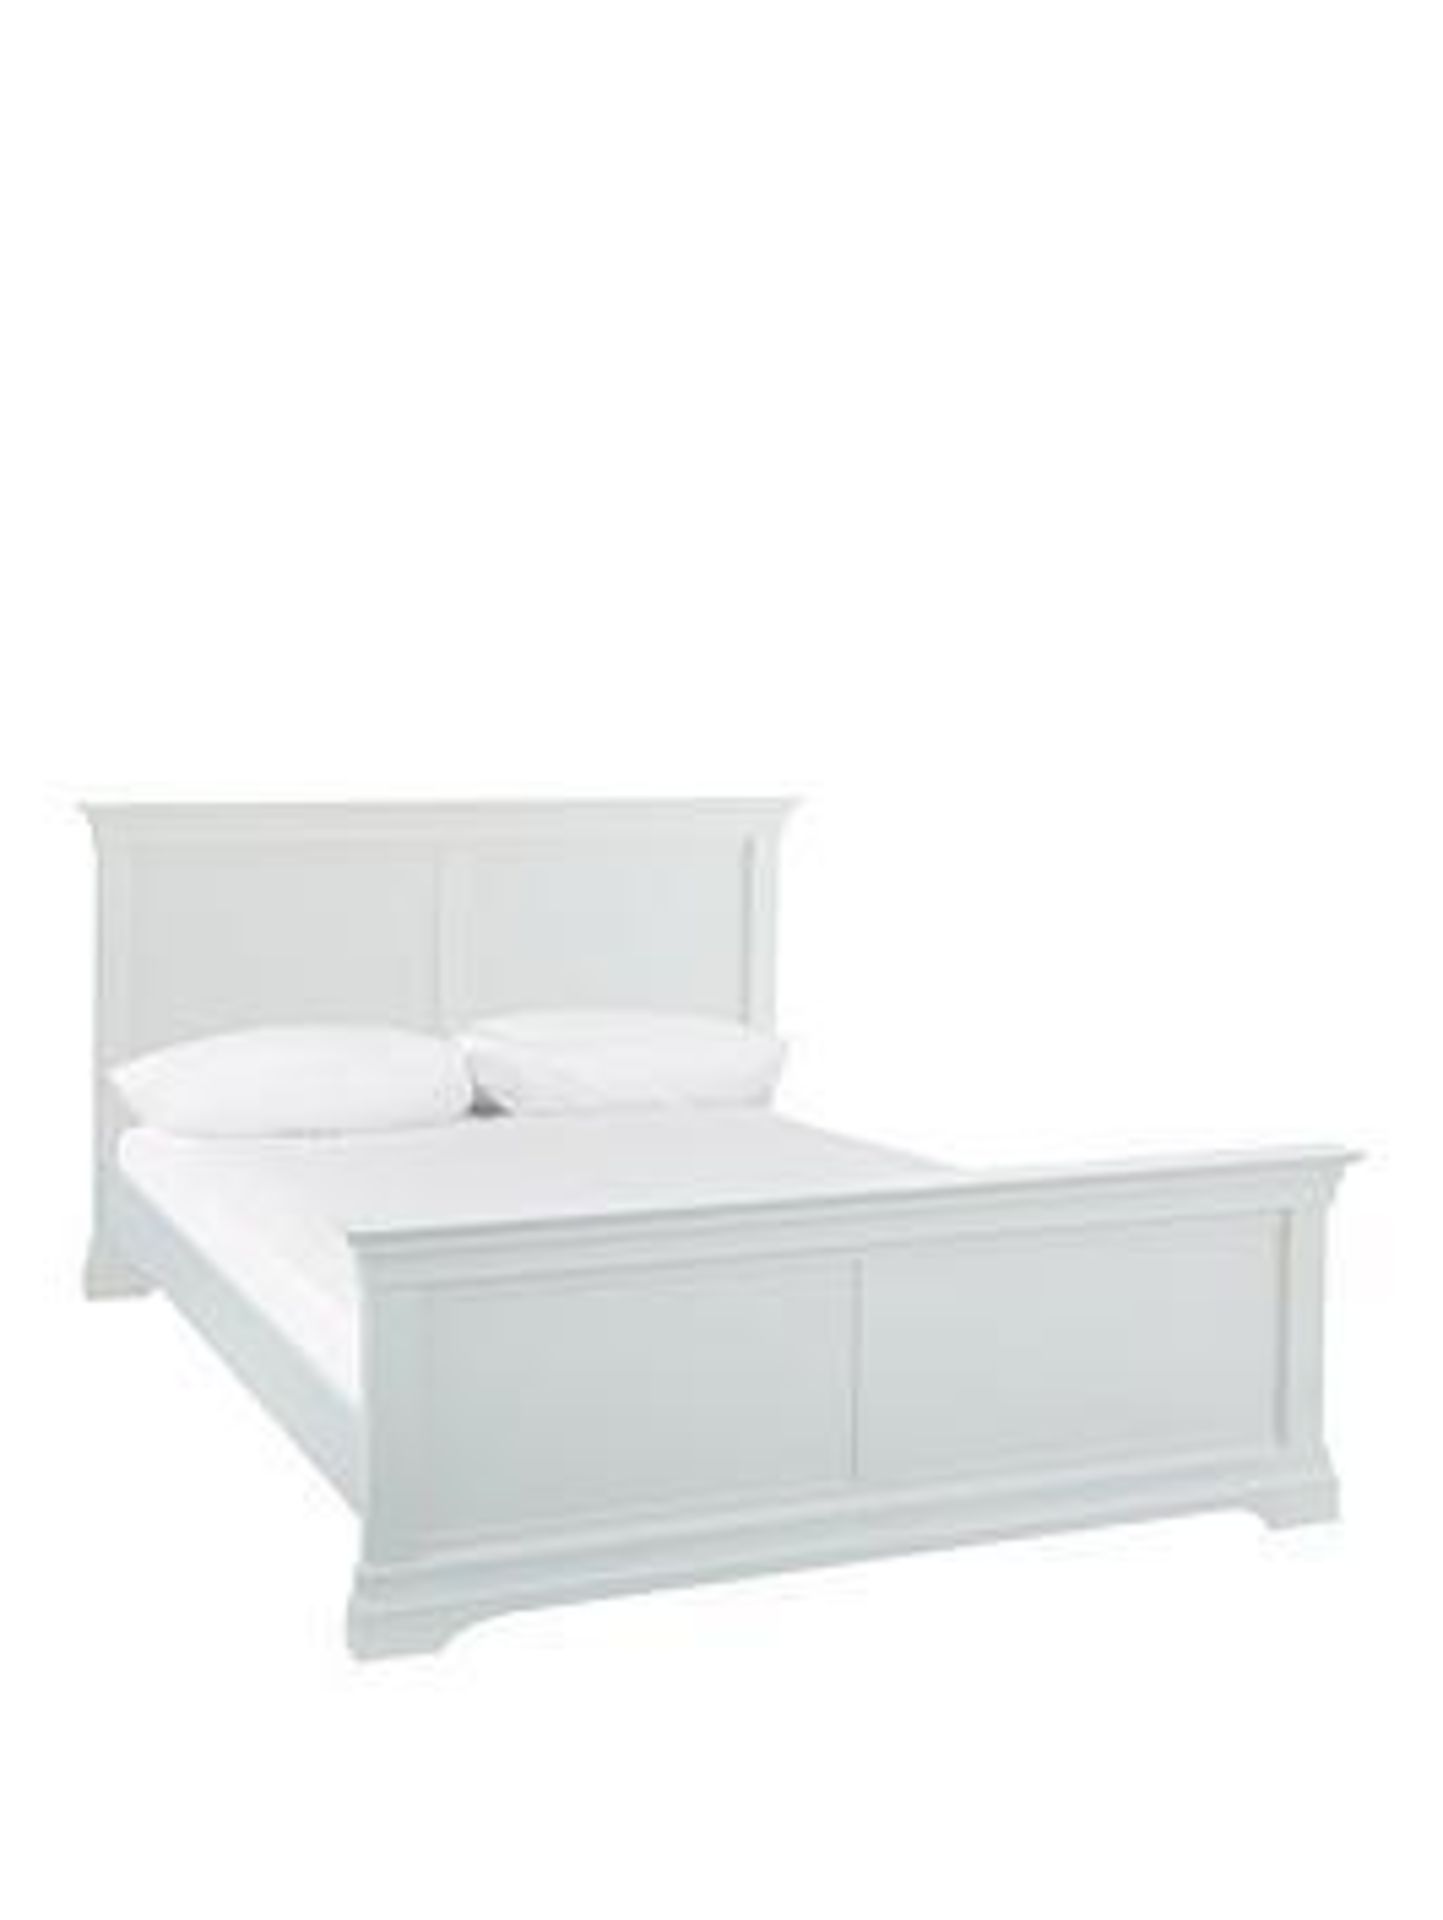 Boxed Item Ideal Home Normandy Double Bed [White] 105X169X215Cm Rrp:£670.0 - Image 2 of 2